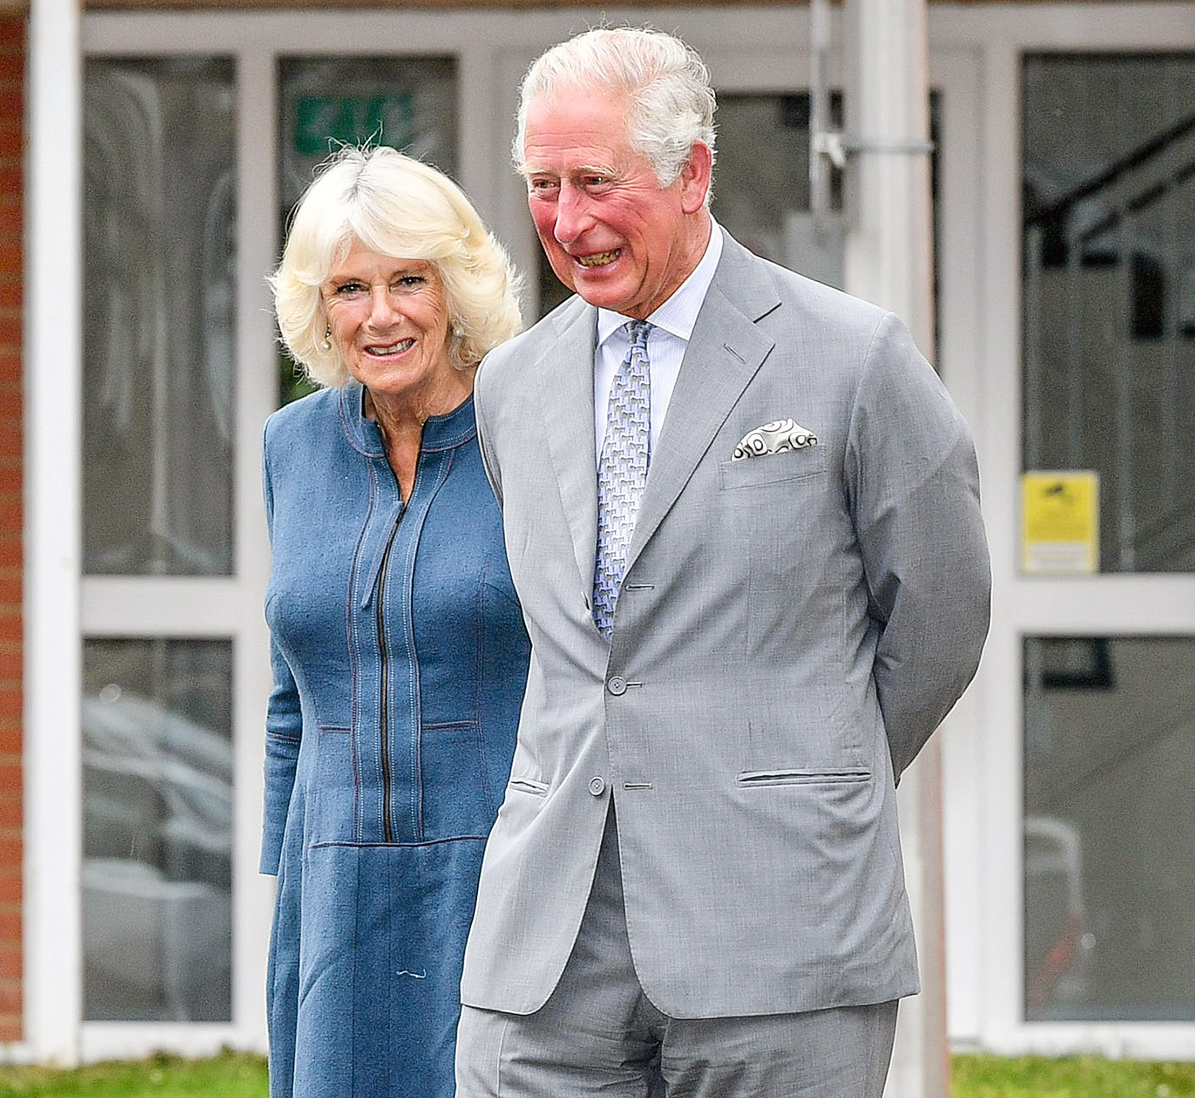 Prince Charles and Duchess Camilla Visit Gloucestershire Royal Hospital Prince Charles Reveals He Lost His Sense of Taste and Smell During COVID-19 Illness and Still Feels Virus Effects